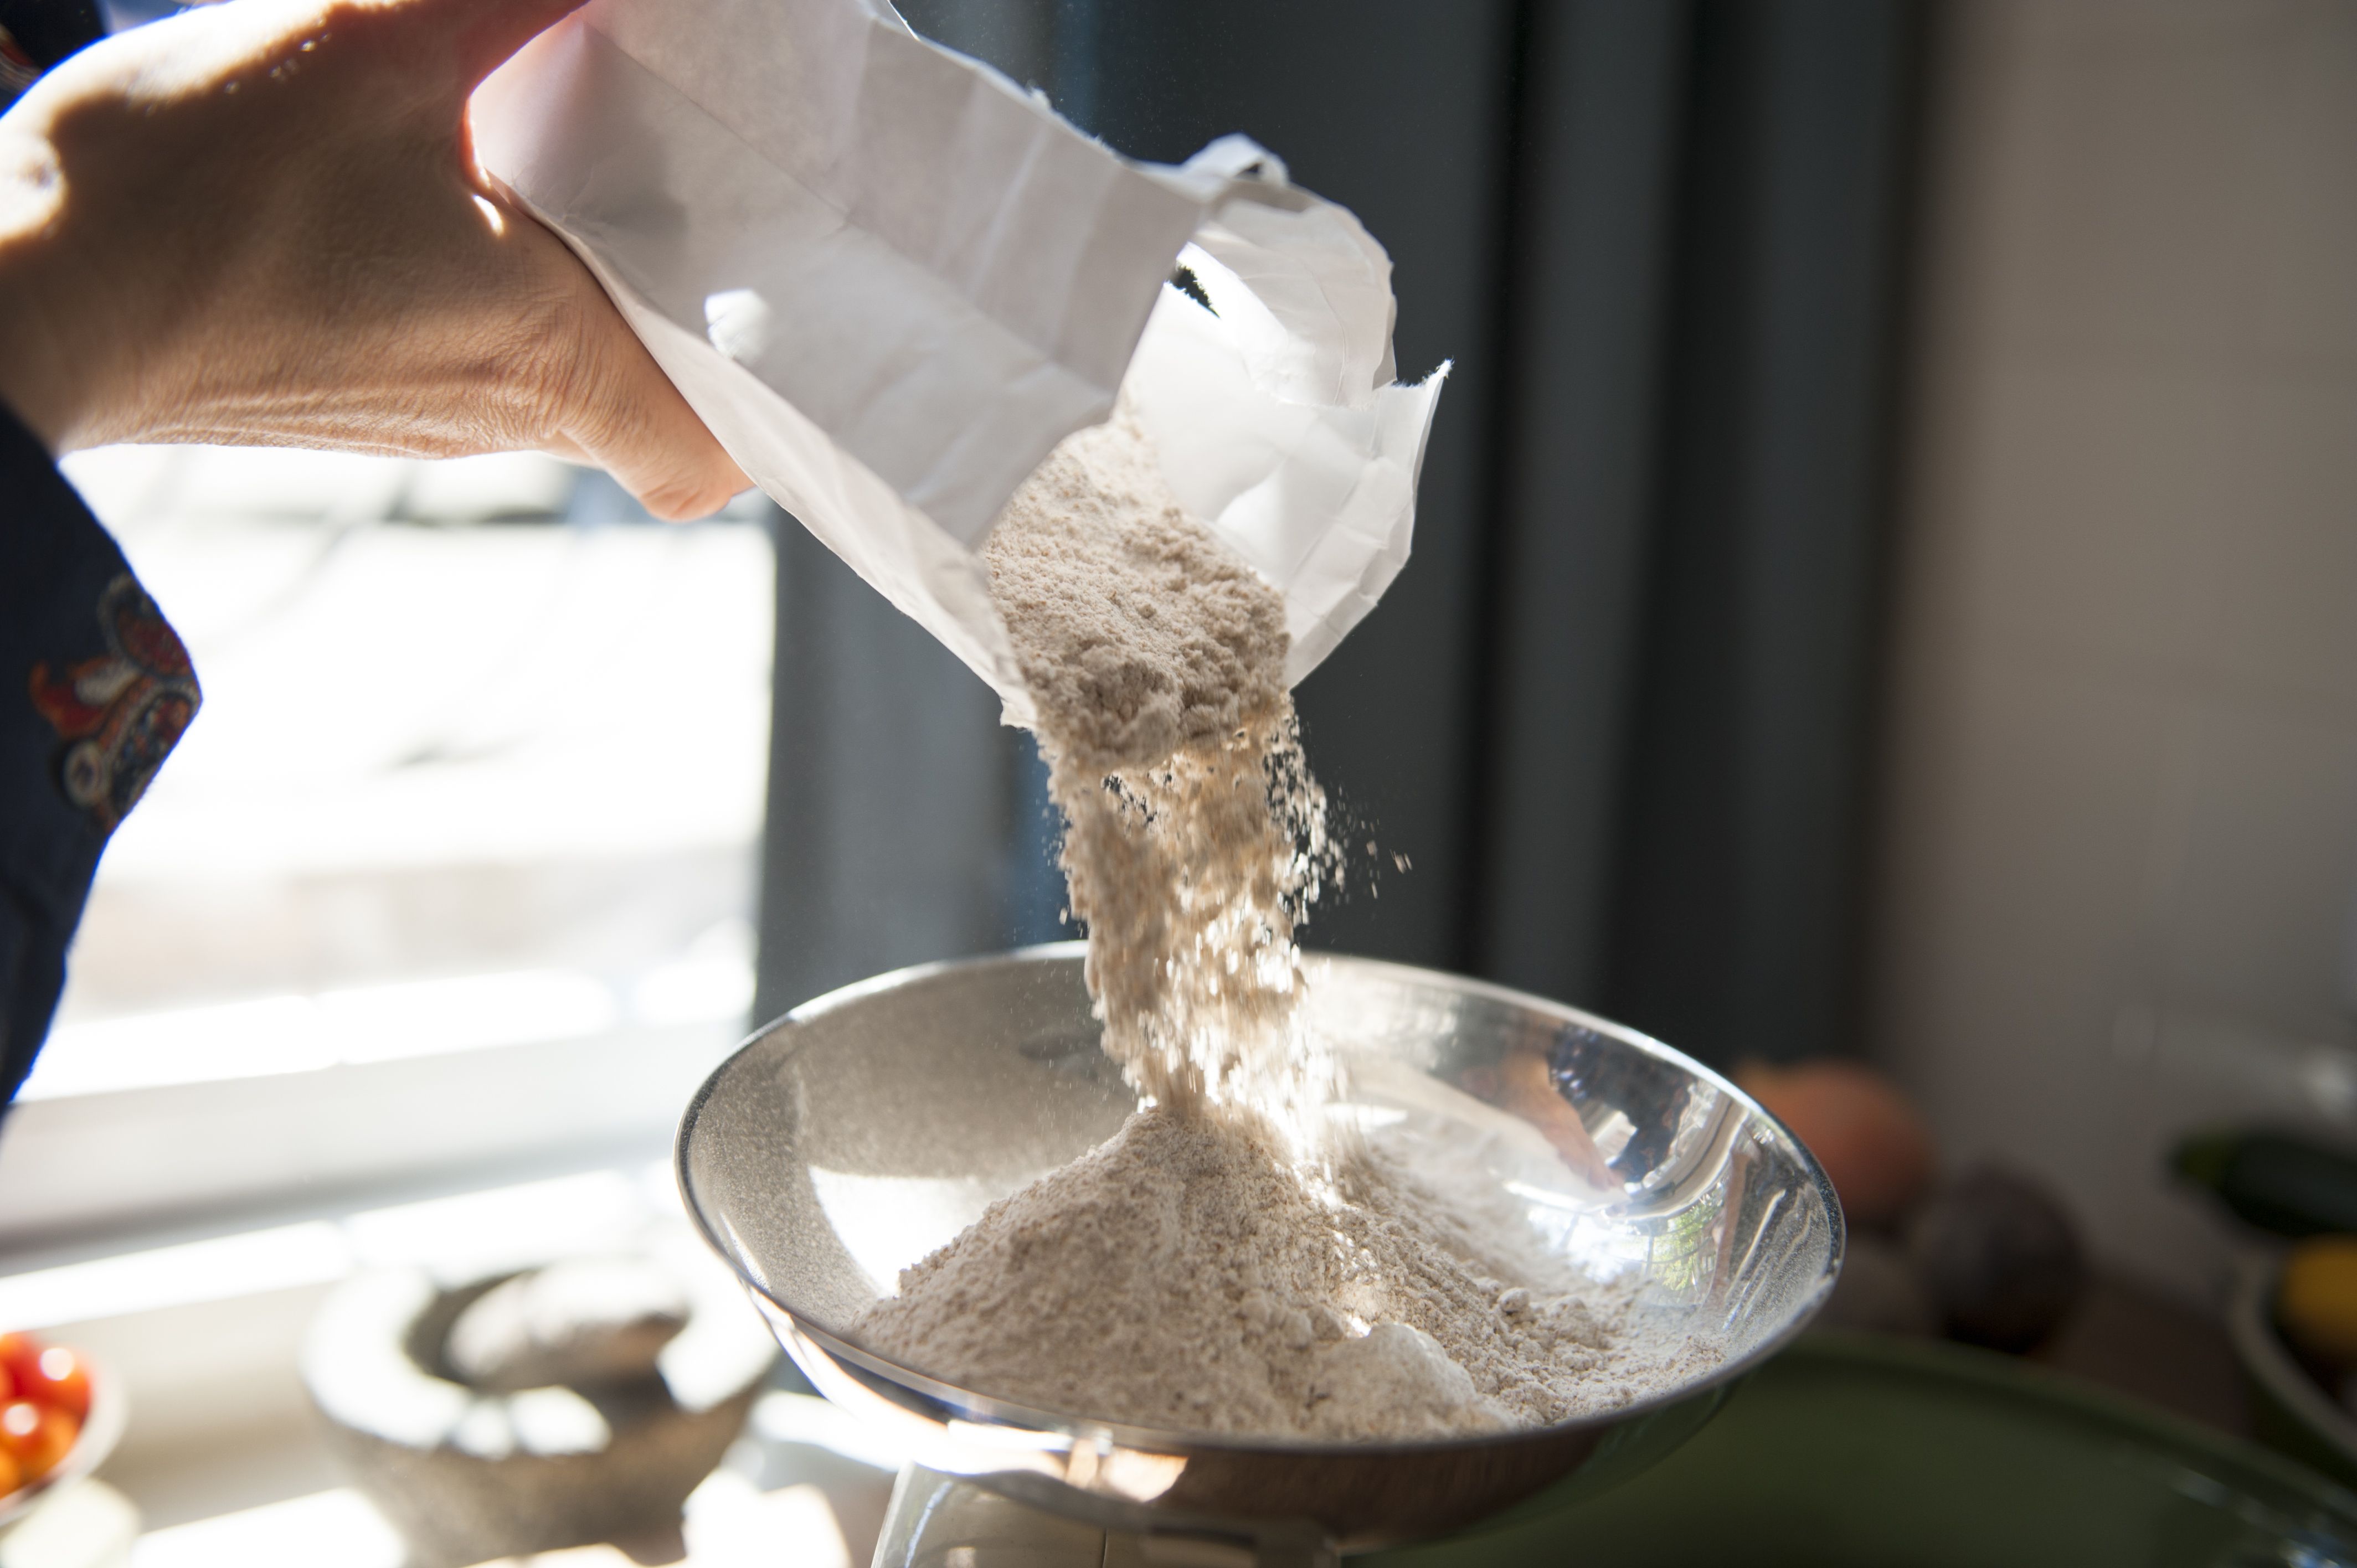 Bread Flour vs. All Purpose: What's The Difference? - The Clever